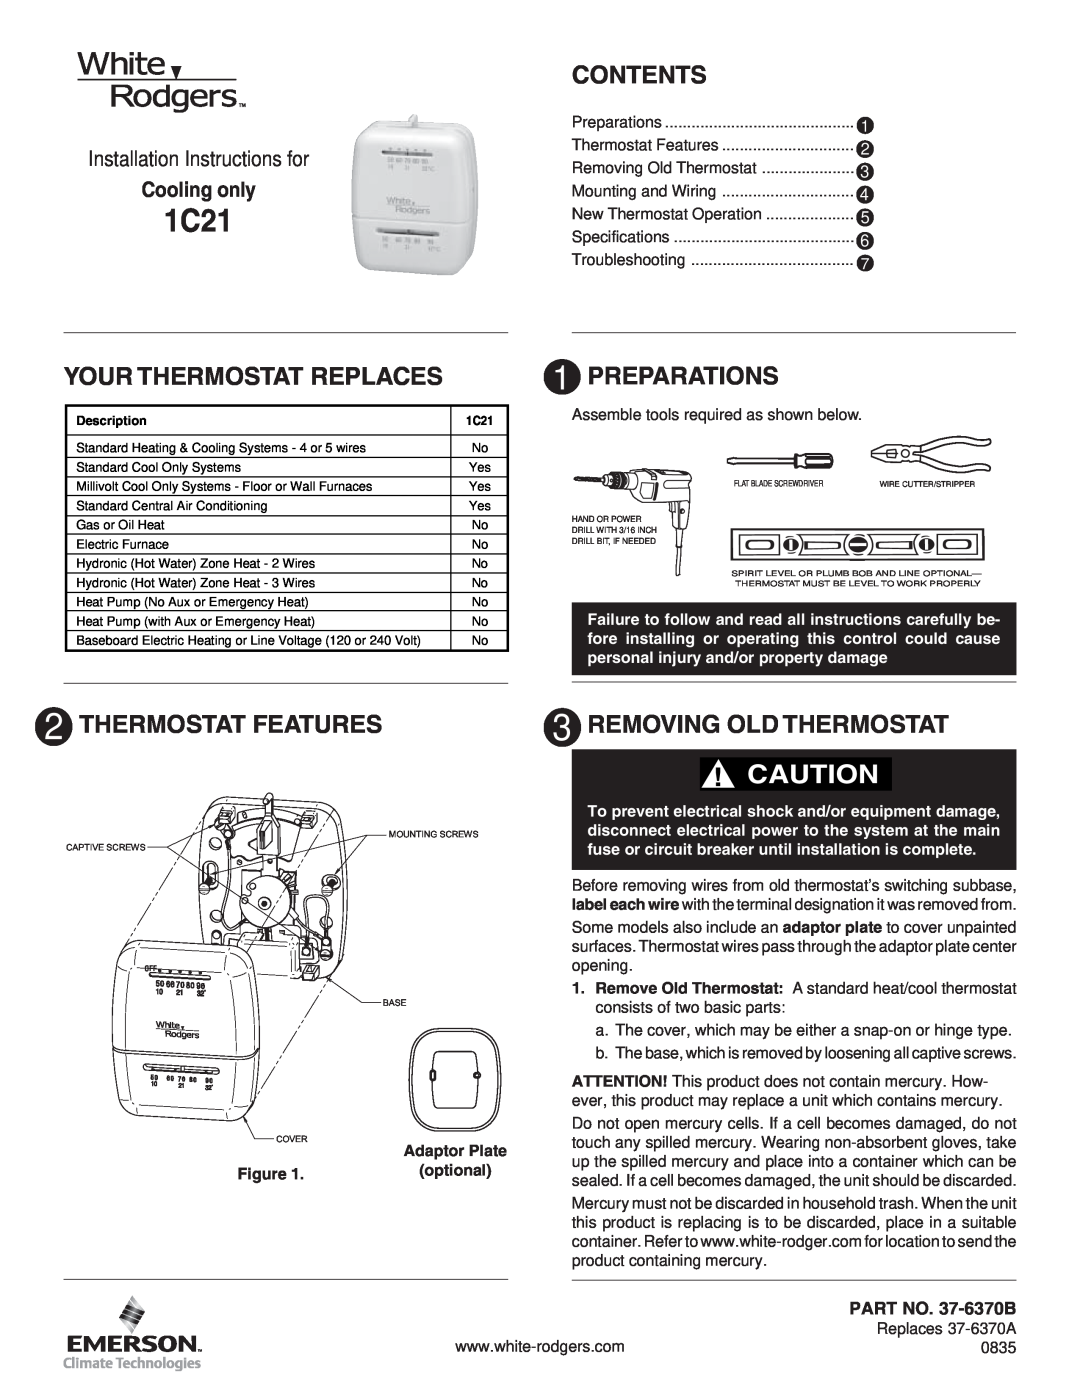 White Rodgers 1C21 installation instructions Your Thermostat Replaces, Contents, Preparations, Thermostat Features 